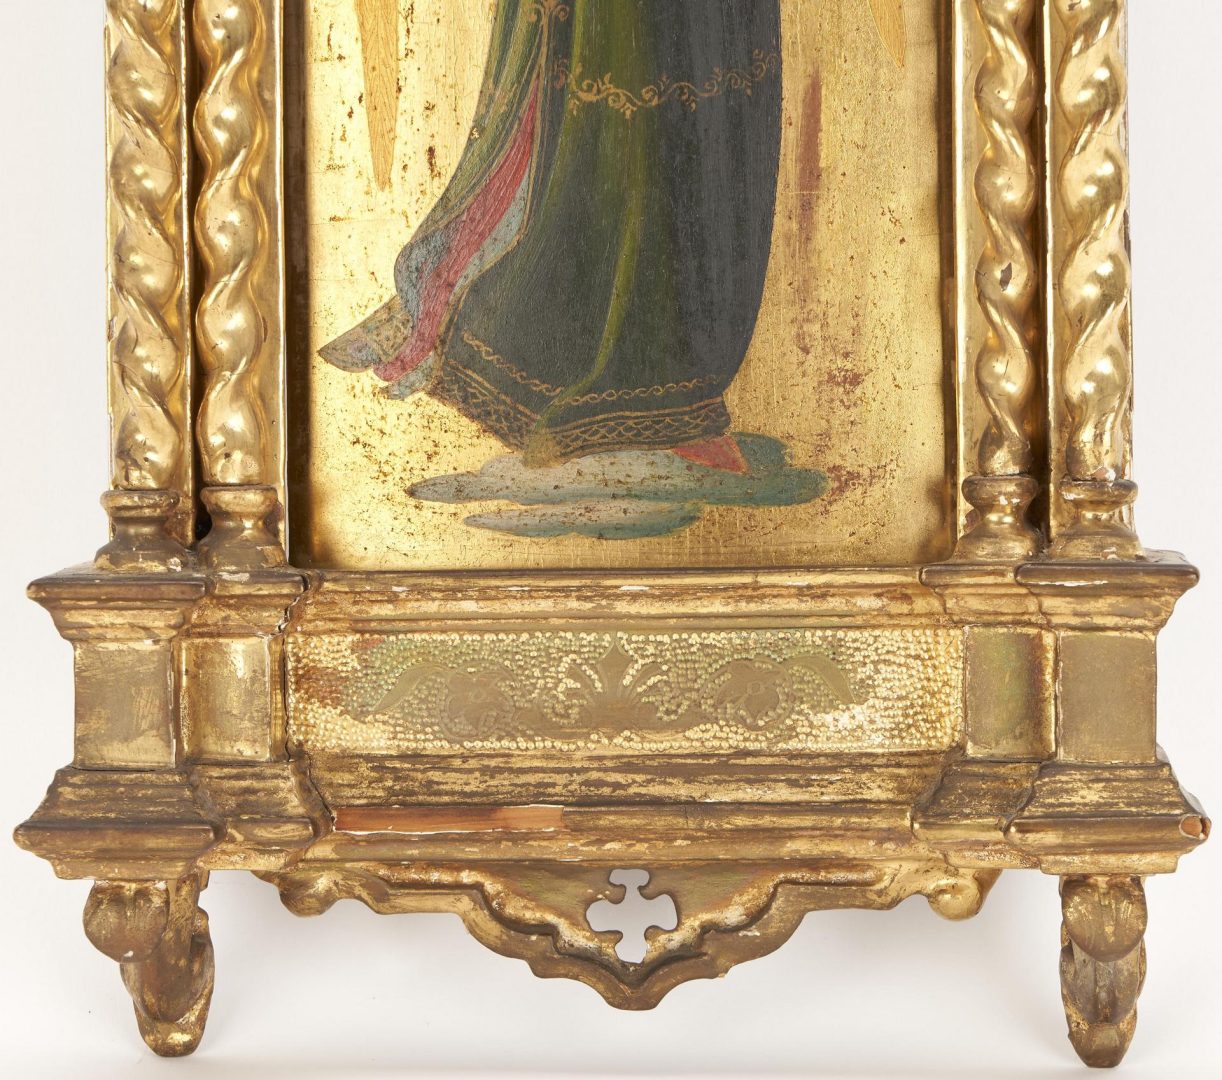 Lot 138: After Fra Angelico Gilt Religious Icon